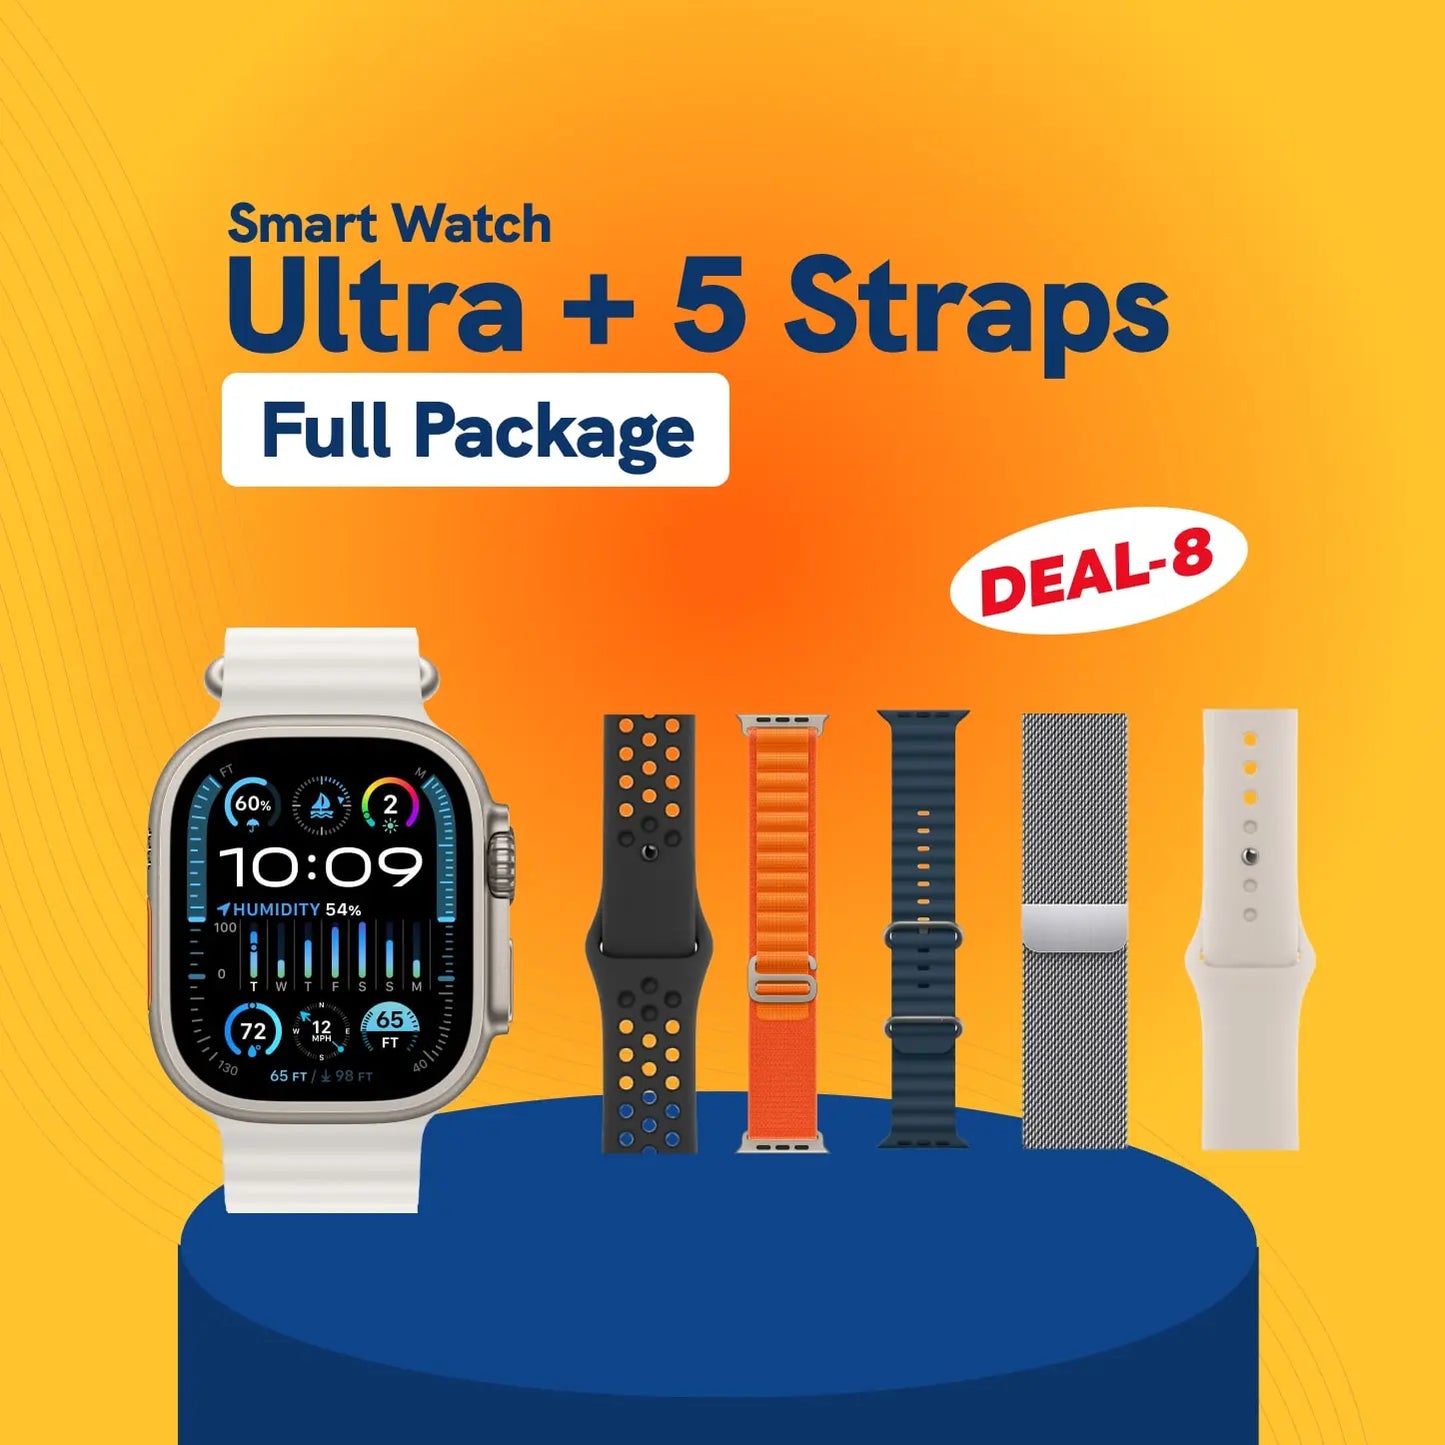 T10 Ultra 2 + 5 Extra Straps Deal